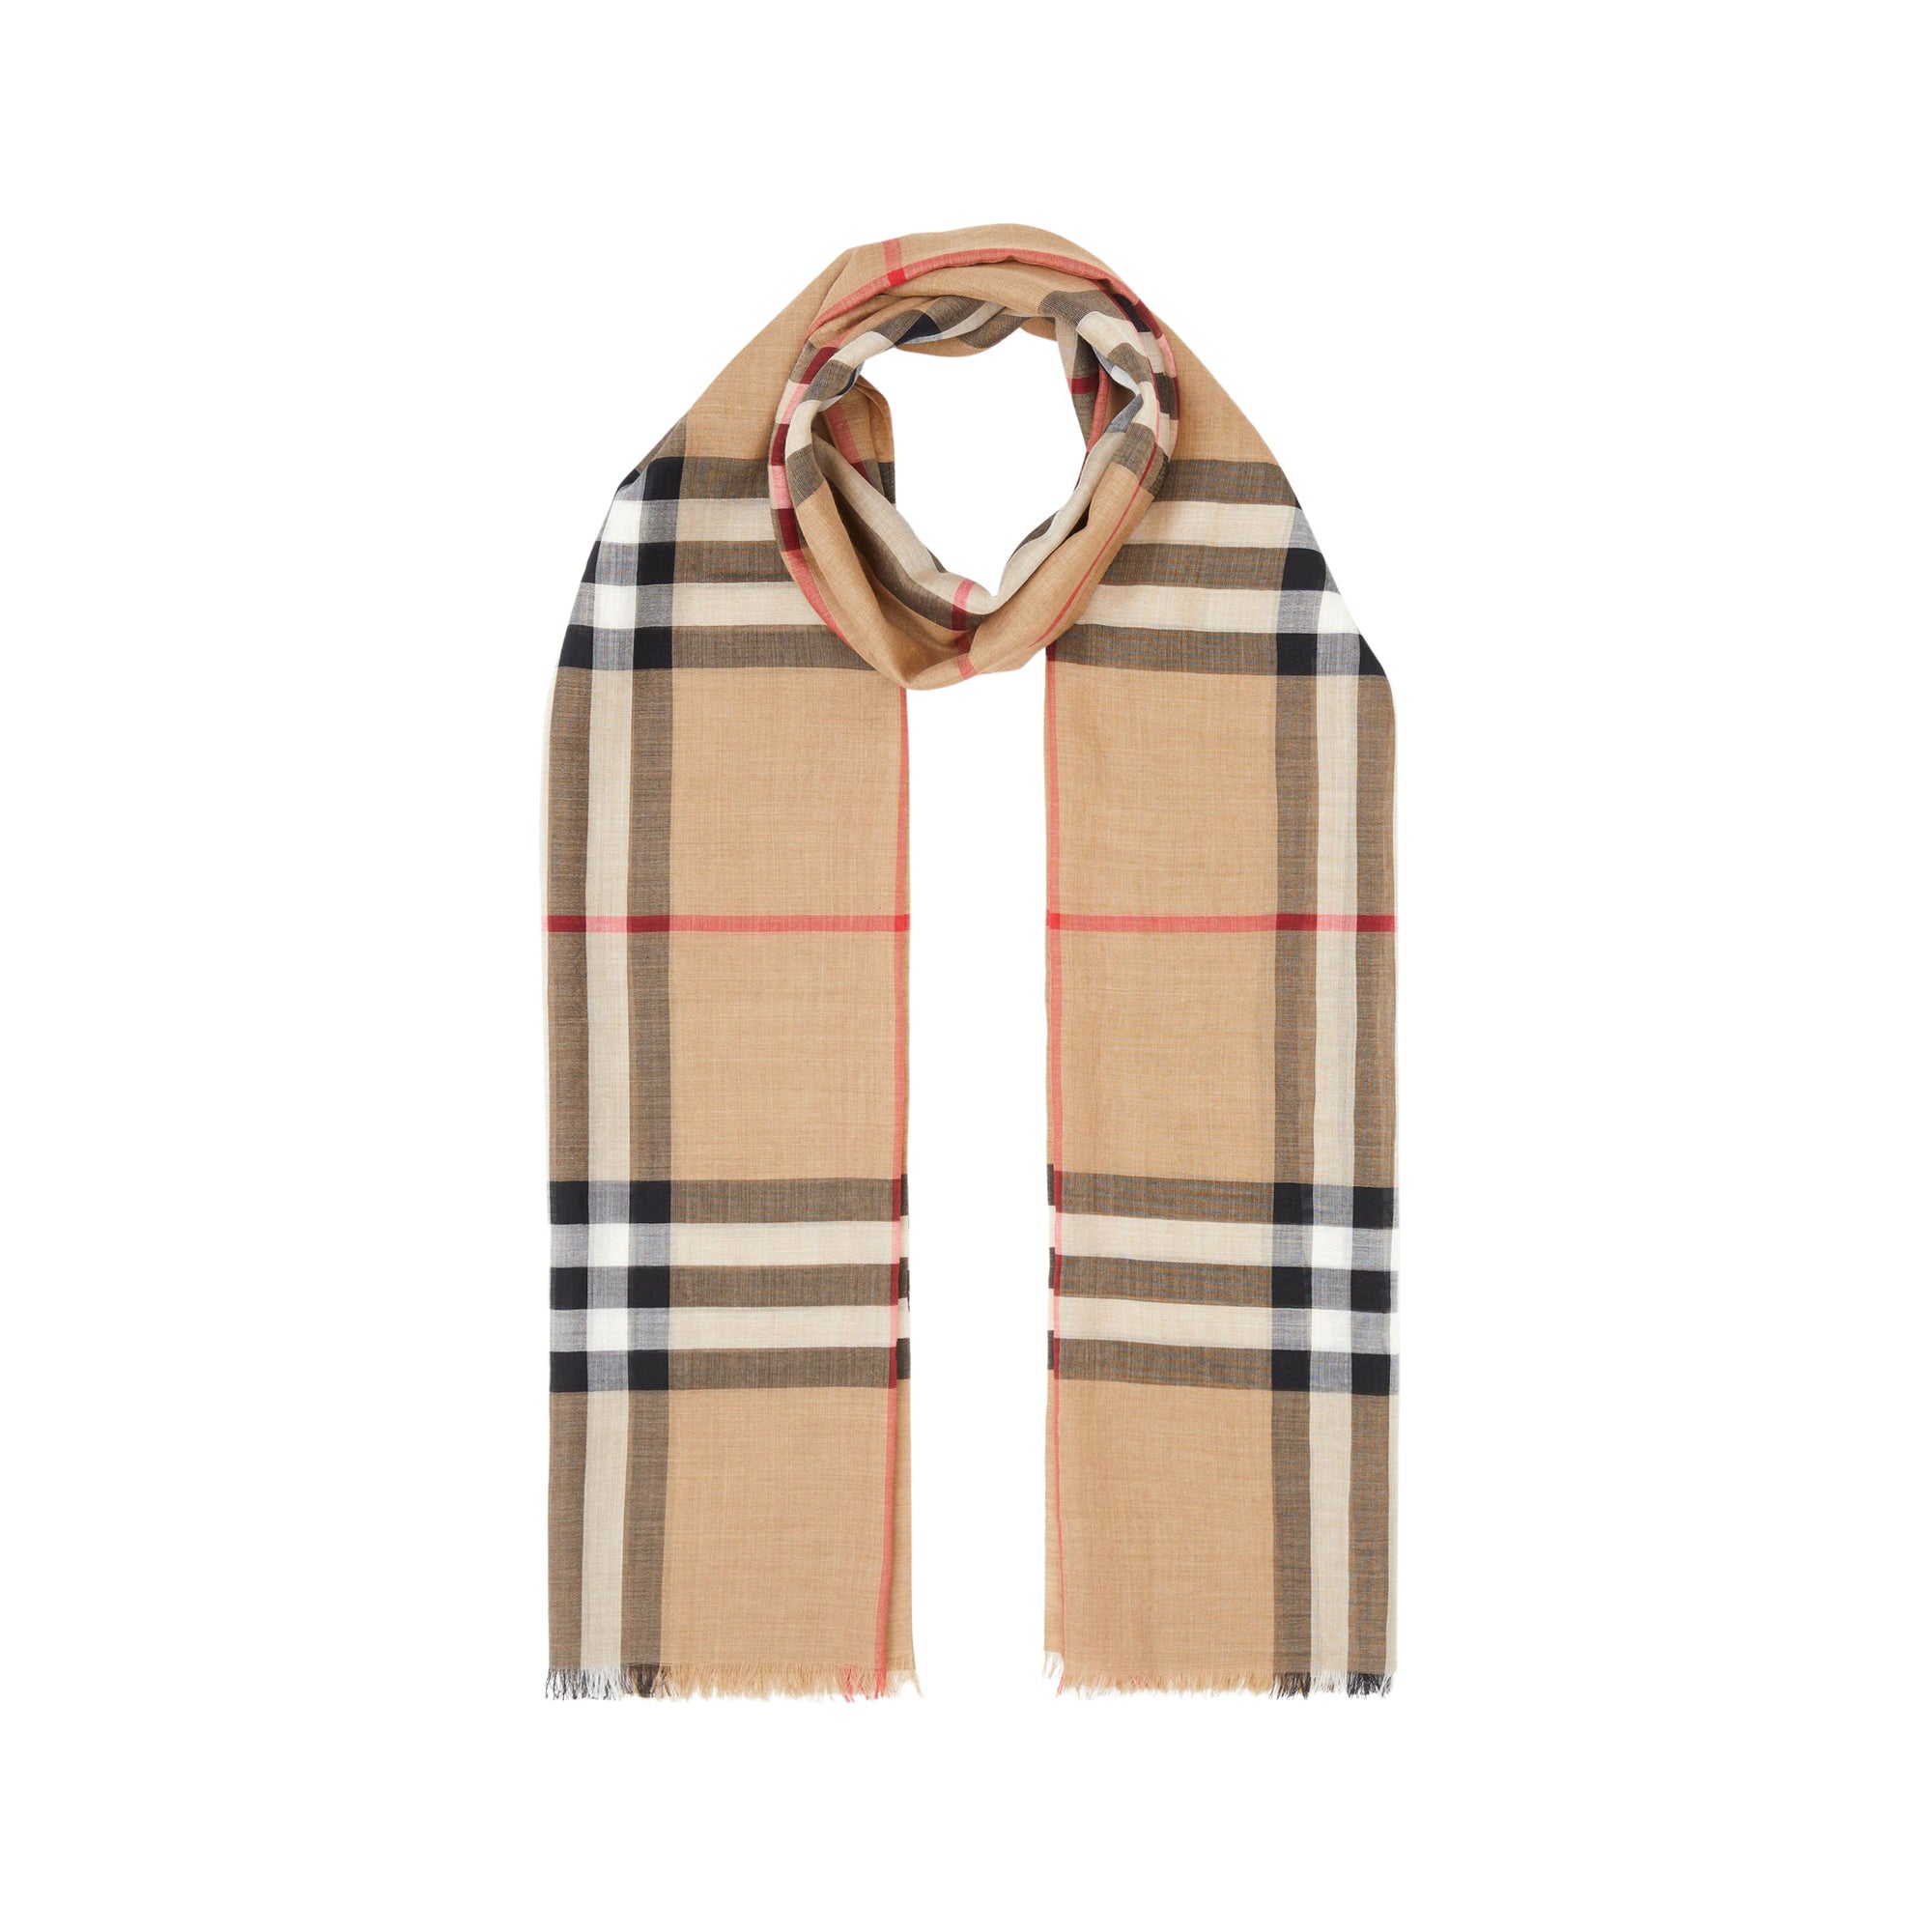 ARCHIVE BEIGE Accessories OTHER SCARVES